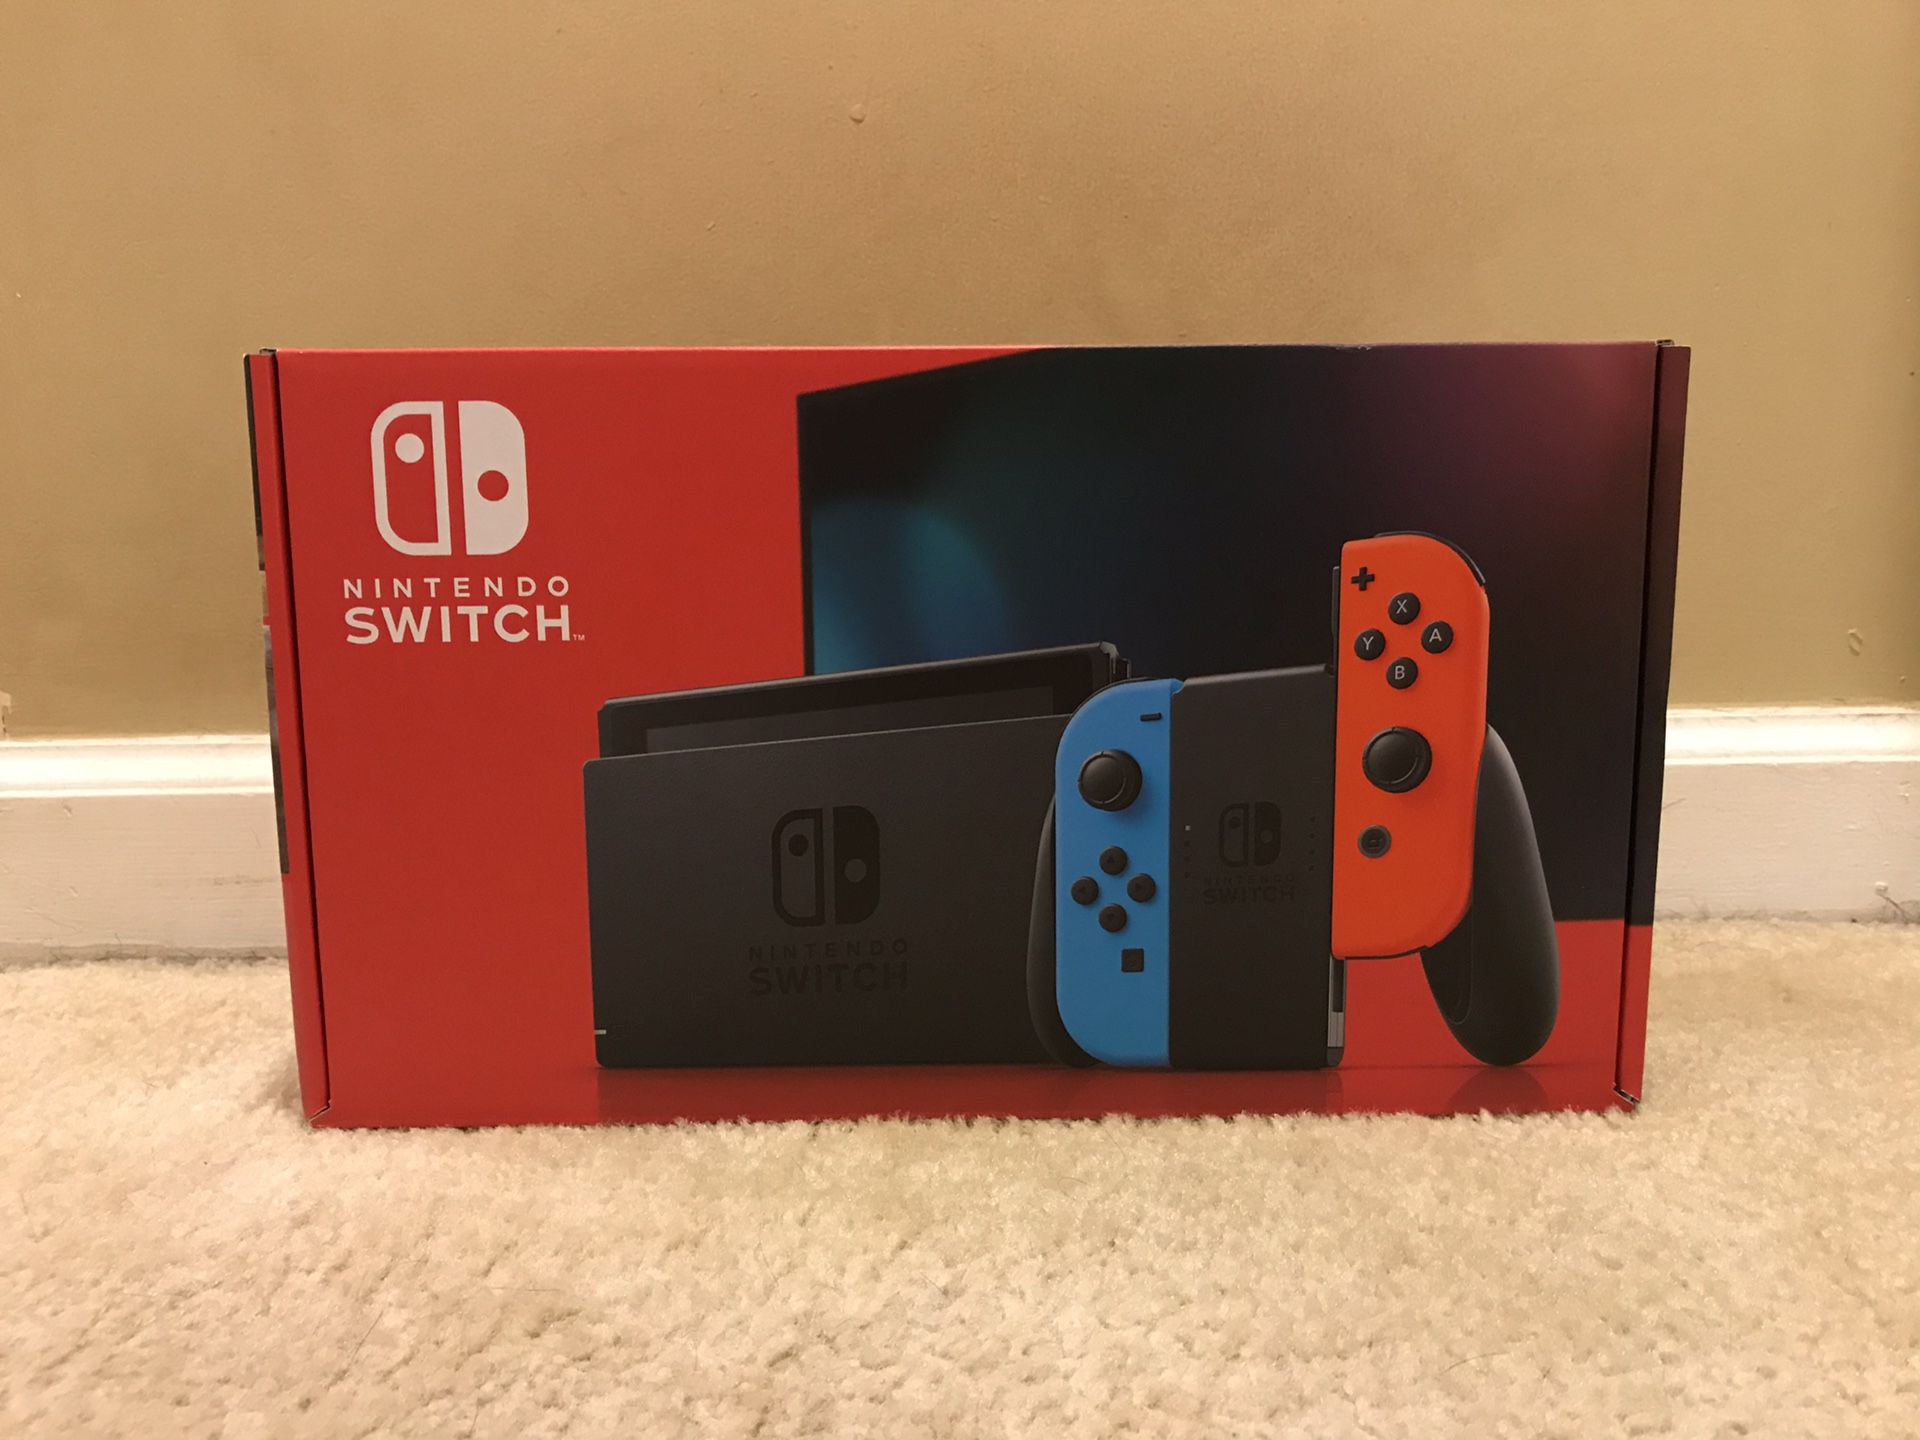 Nintendo Switch V2 with Neon Blue/Red Joy-Cons